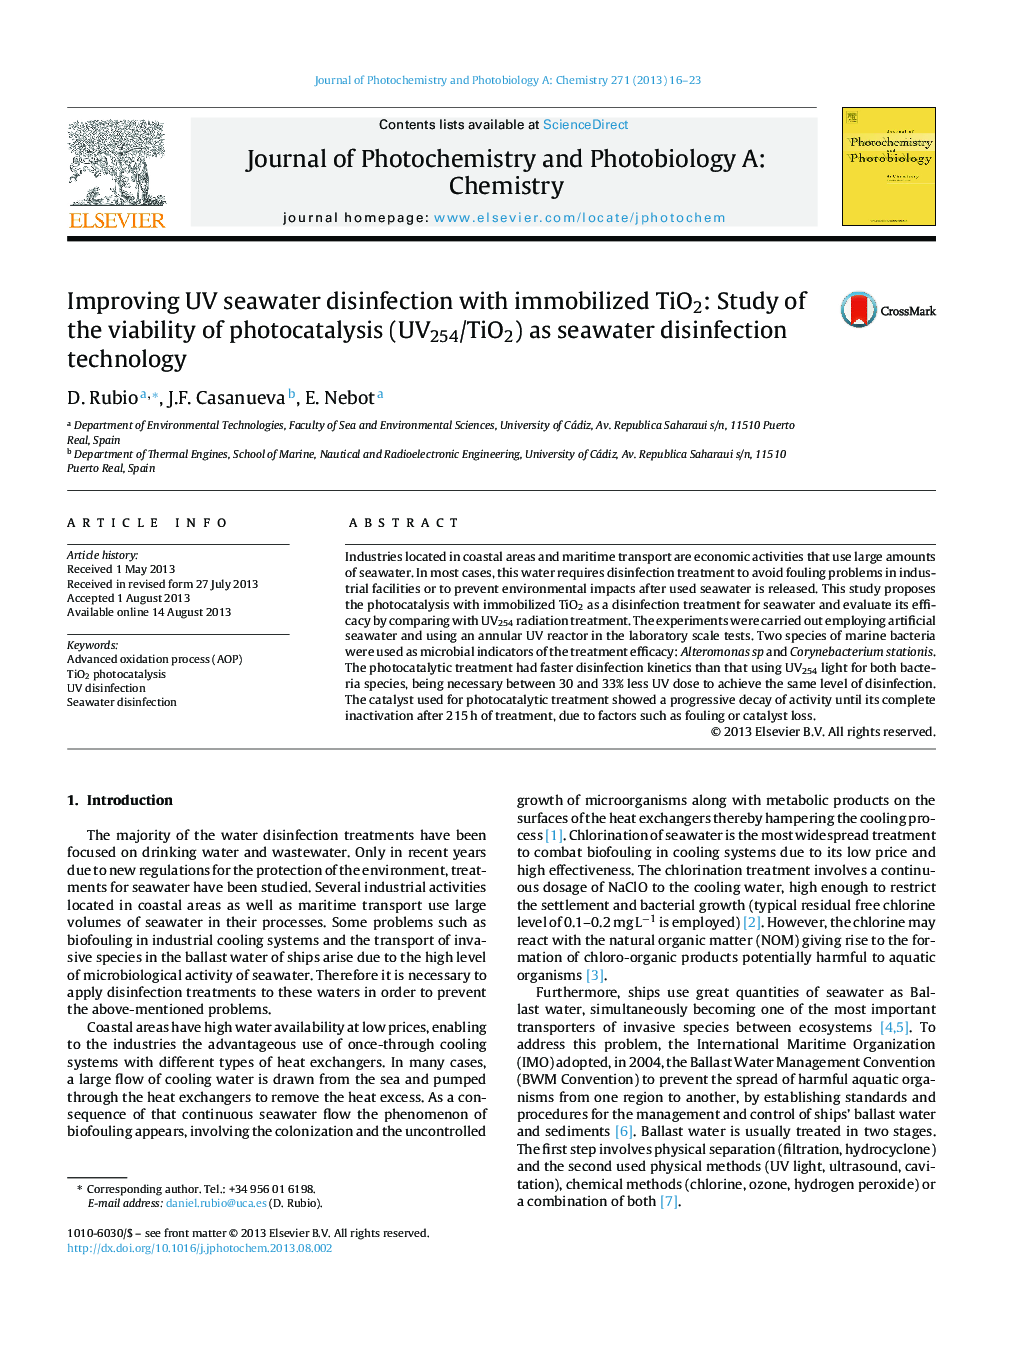 Improving UV seawater disinfection with immobilized TiO2: Study of the viability of photocatalysis (UV254/TiO2) as seawater disinfection technology